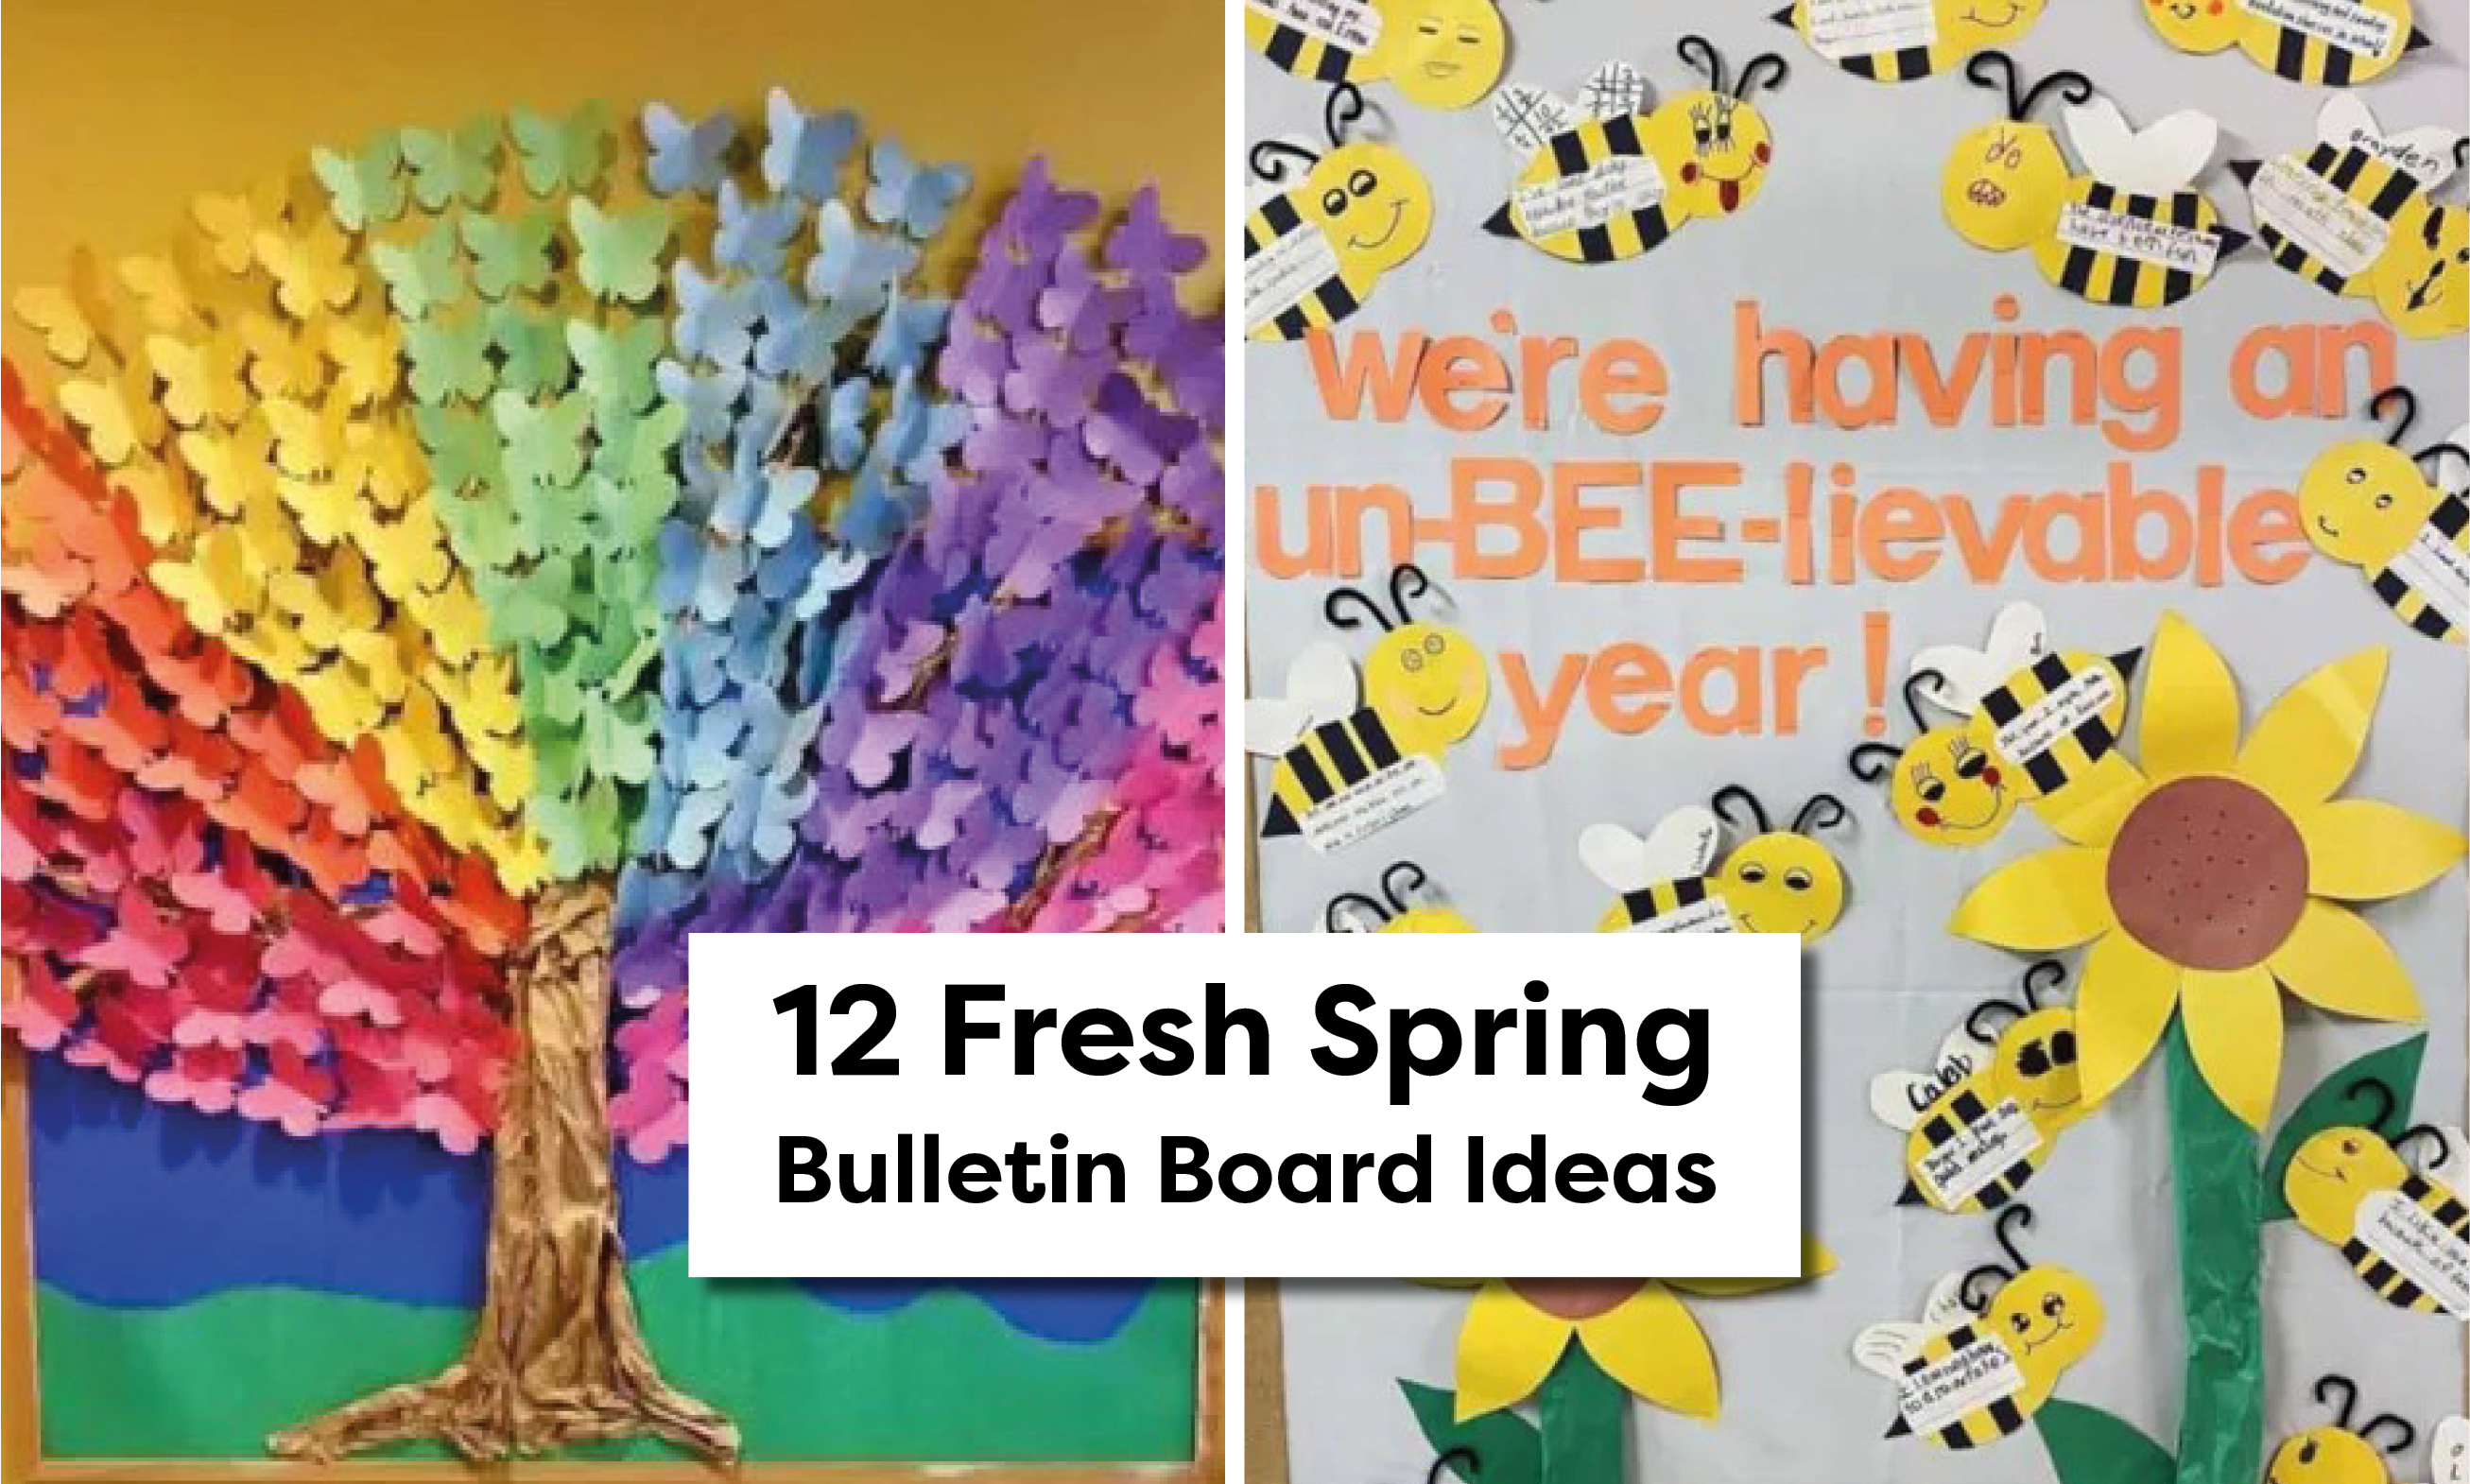 5 Bulletin Boards That You Can Keep Up All Year - The Applicious Teacher